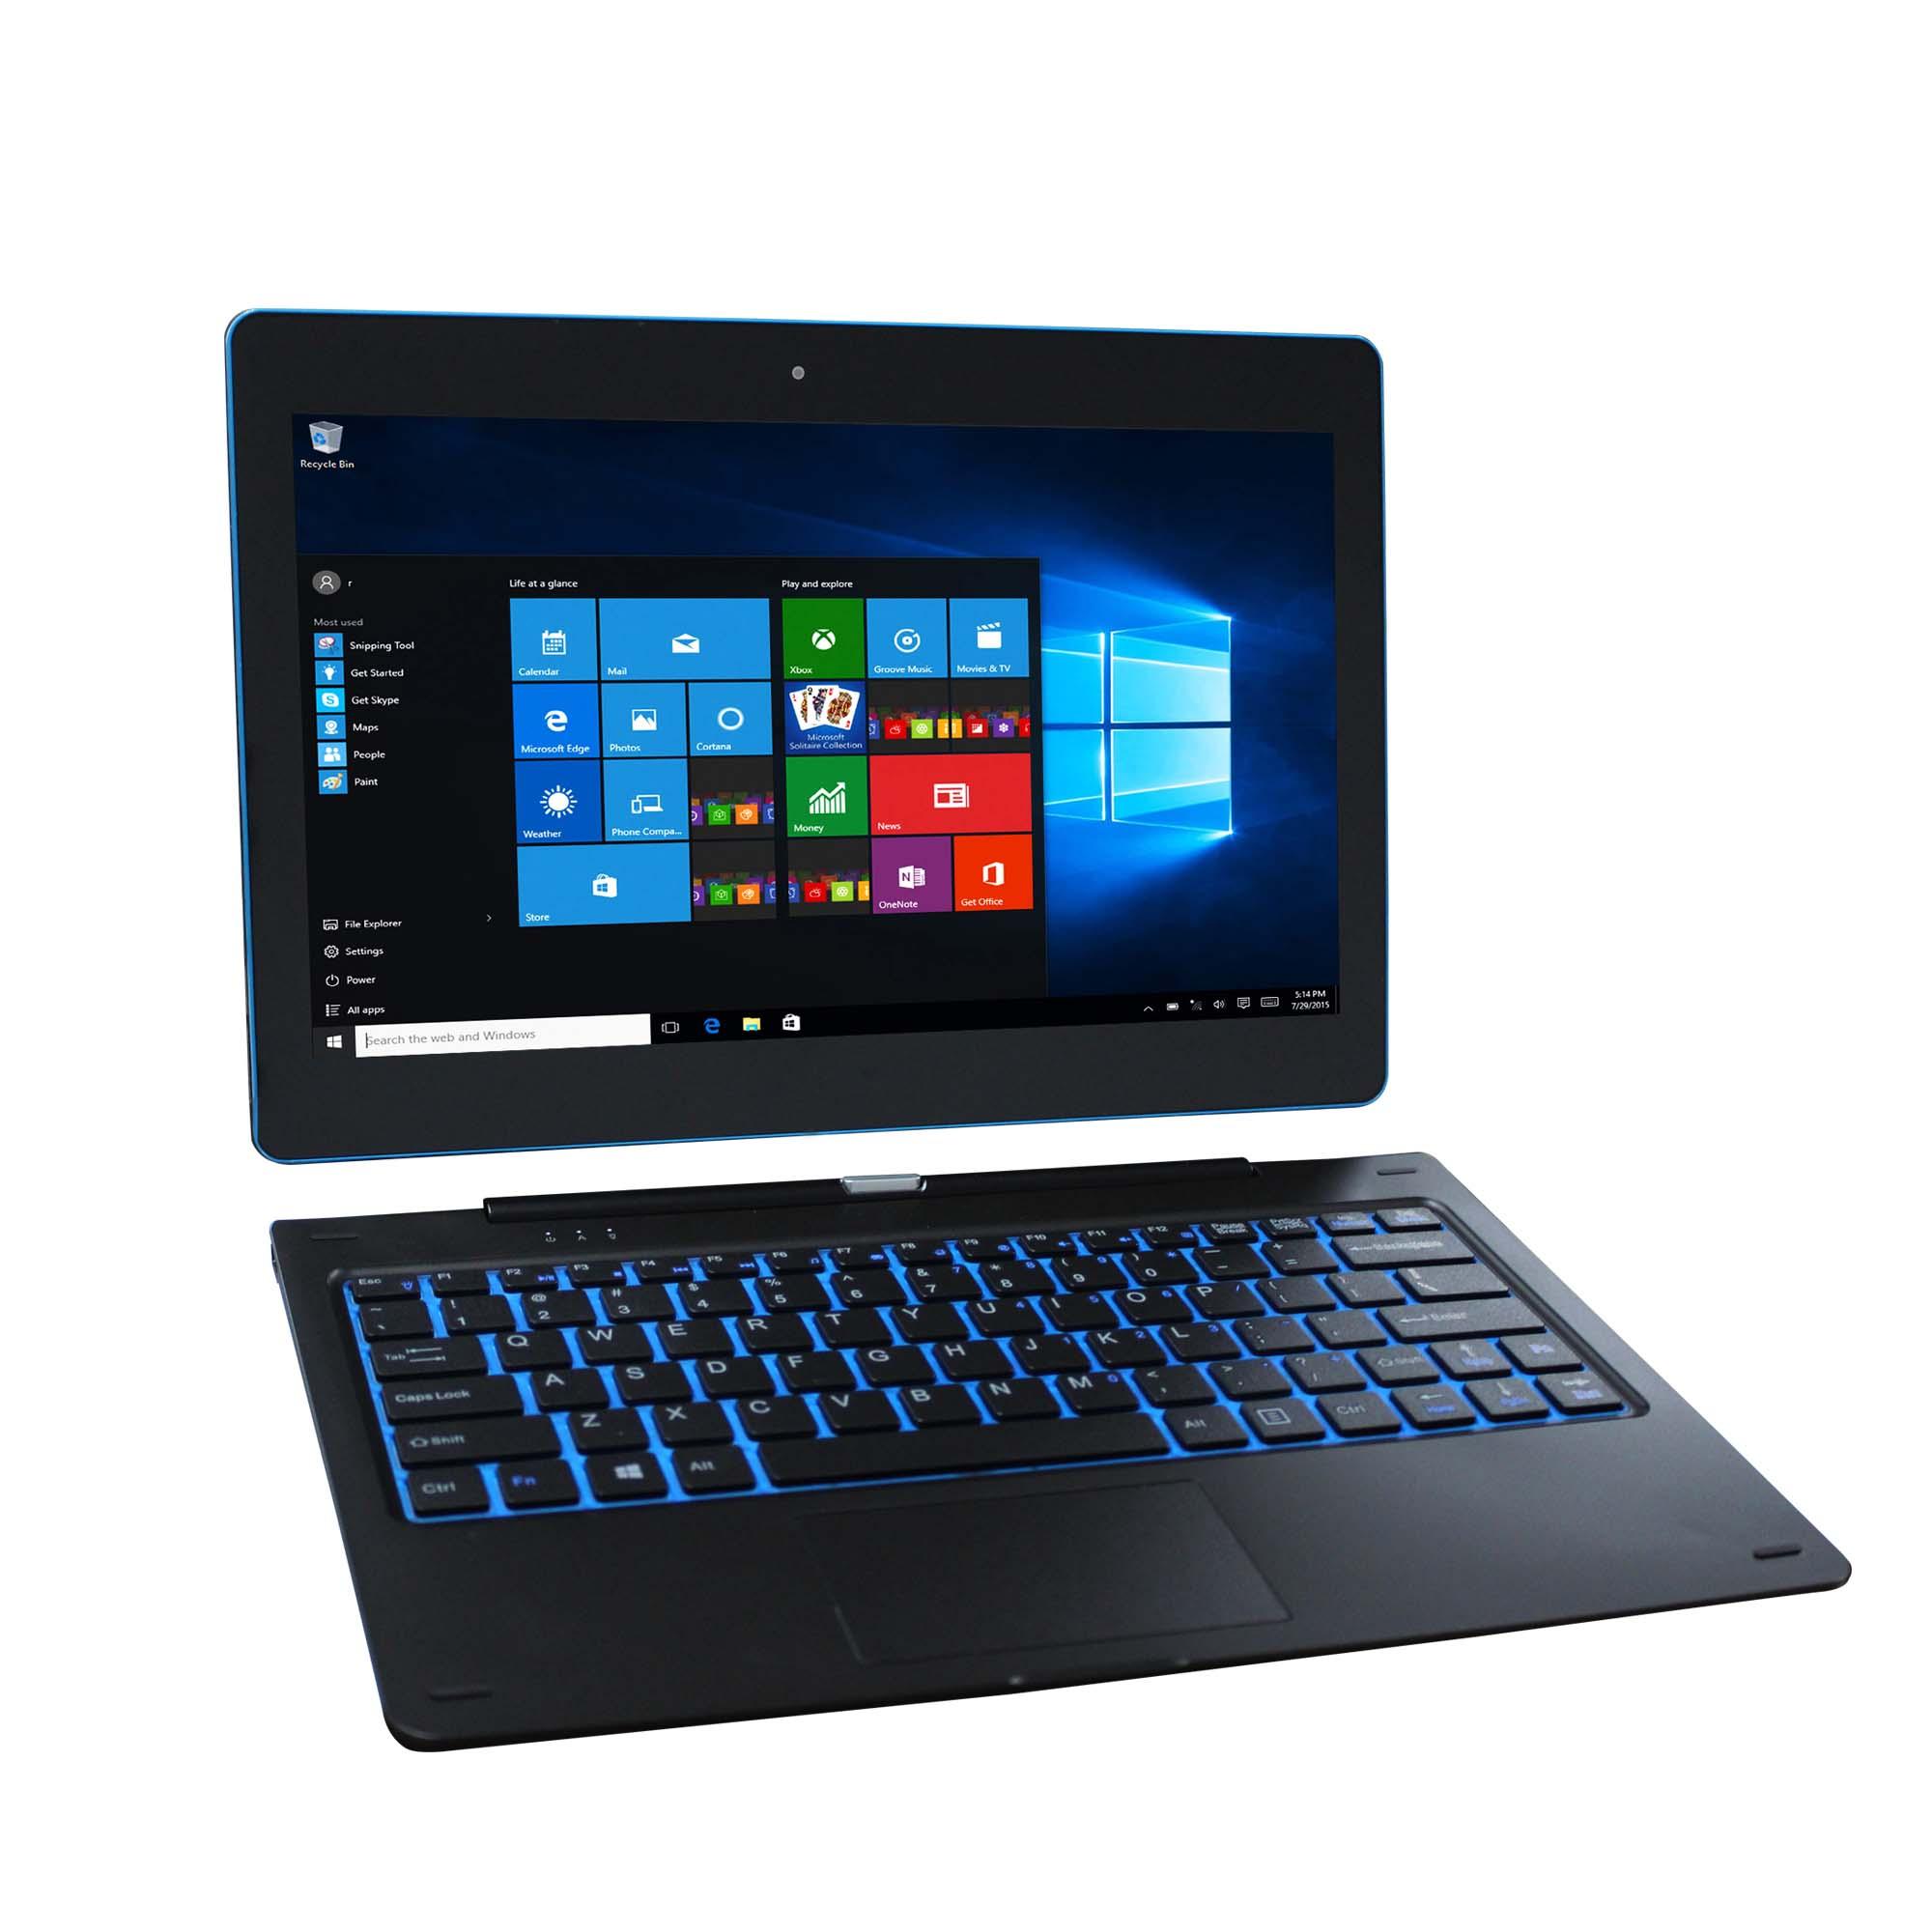 Buy & Sell Cheapest LAPTOP Best Quality Product Deals - Philippines Store